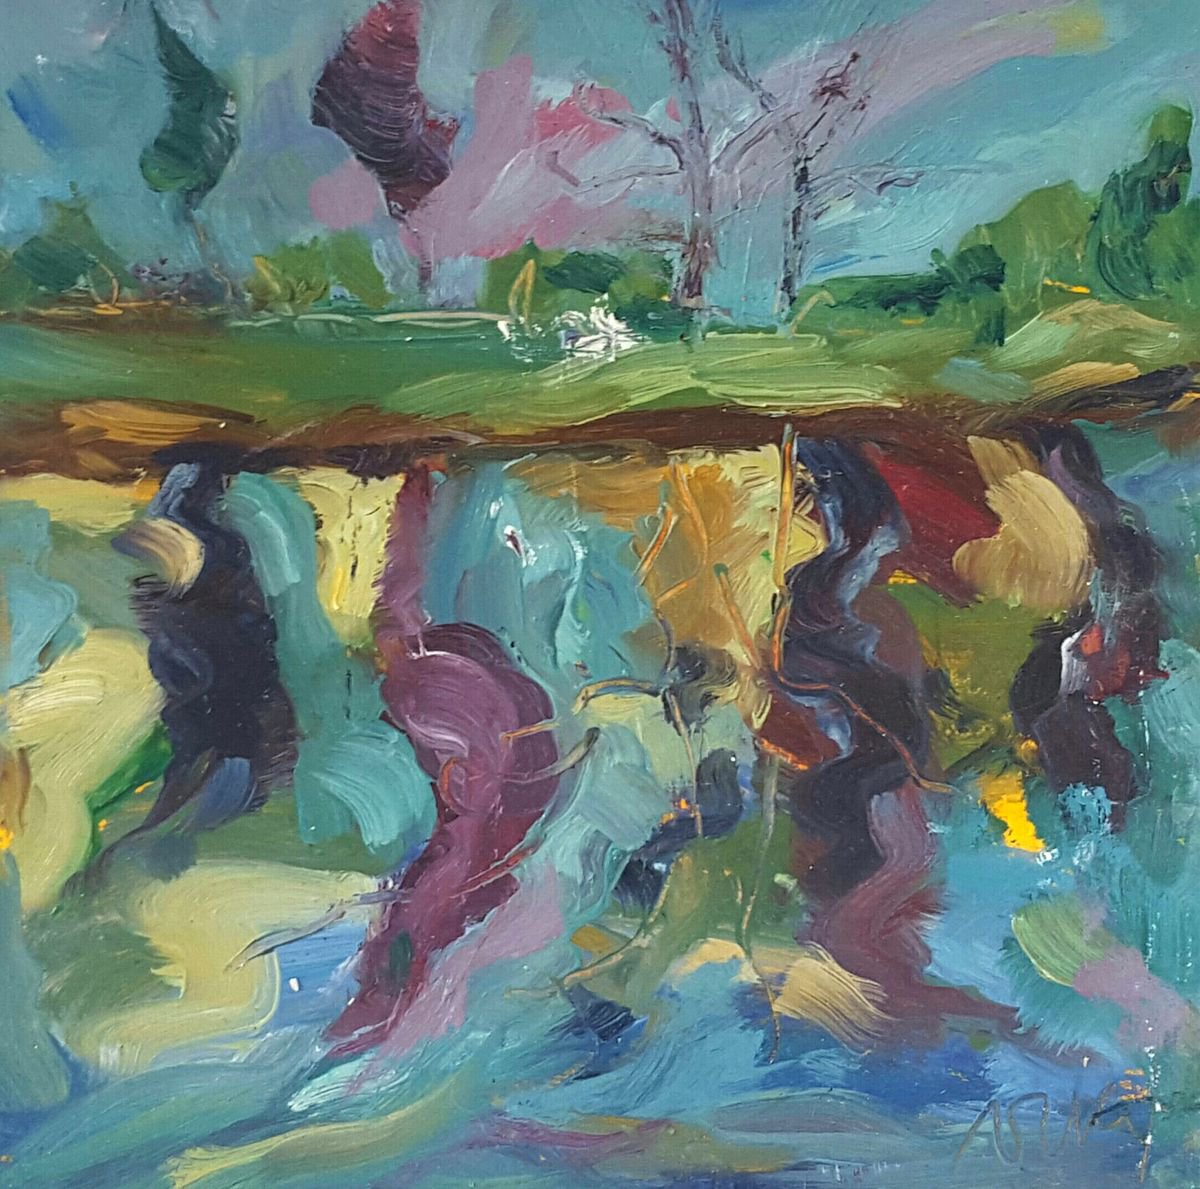 Swirling Tree reflections in water by Niki Purcell - Irish Landscape Painting